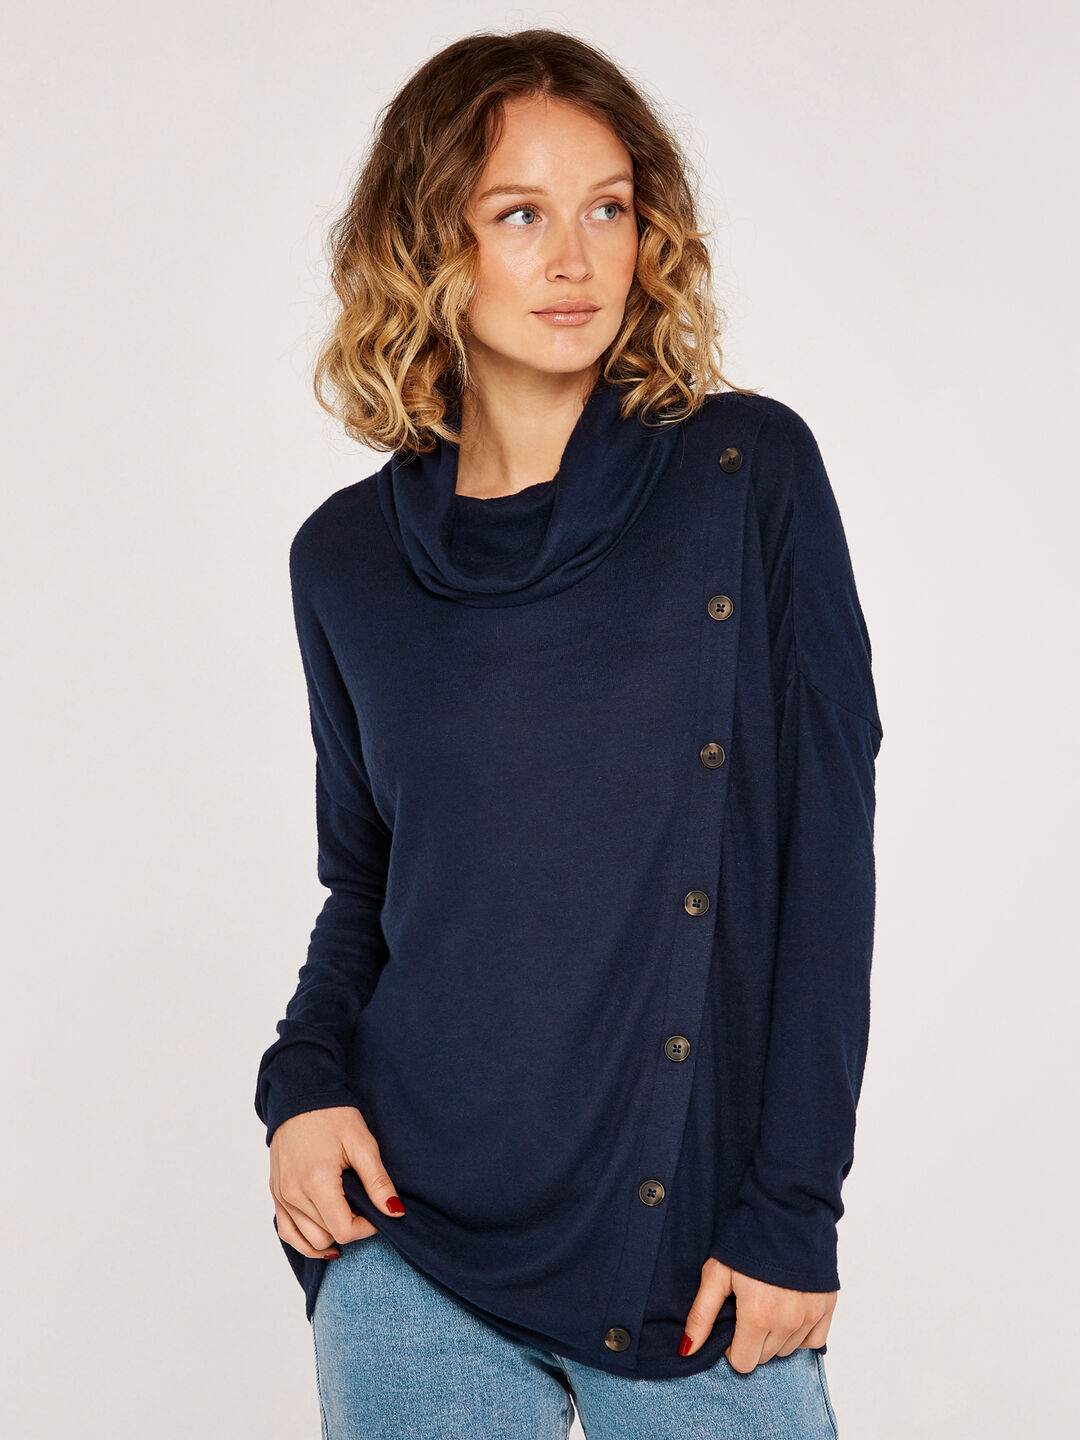 Soft Marl Mock Neck Button Front Top